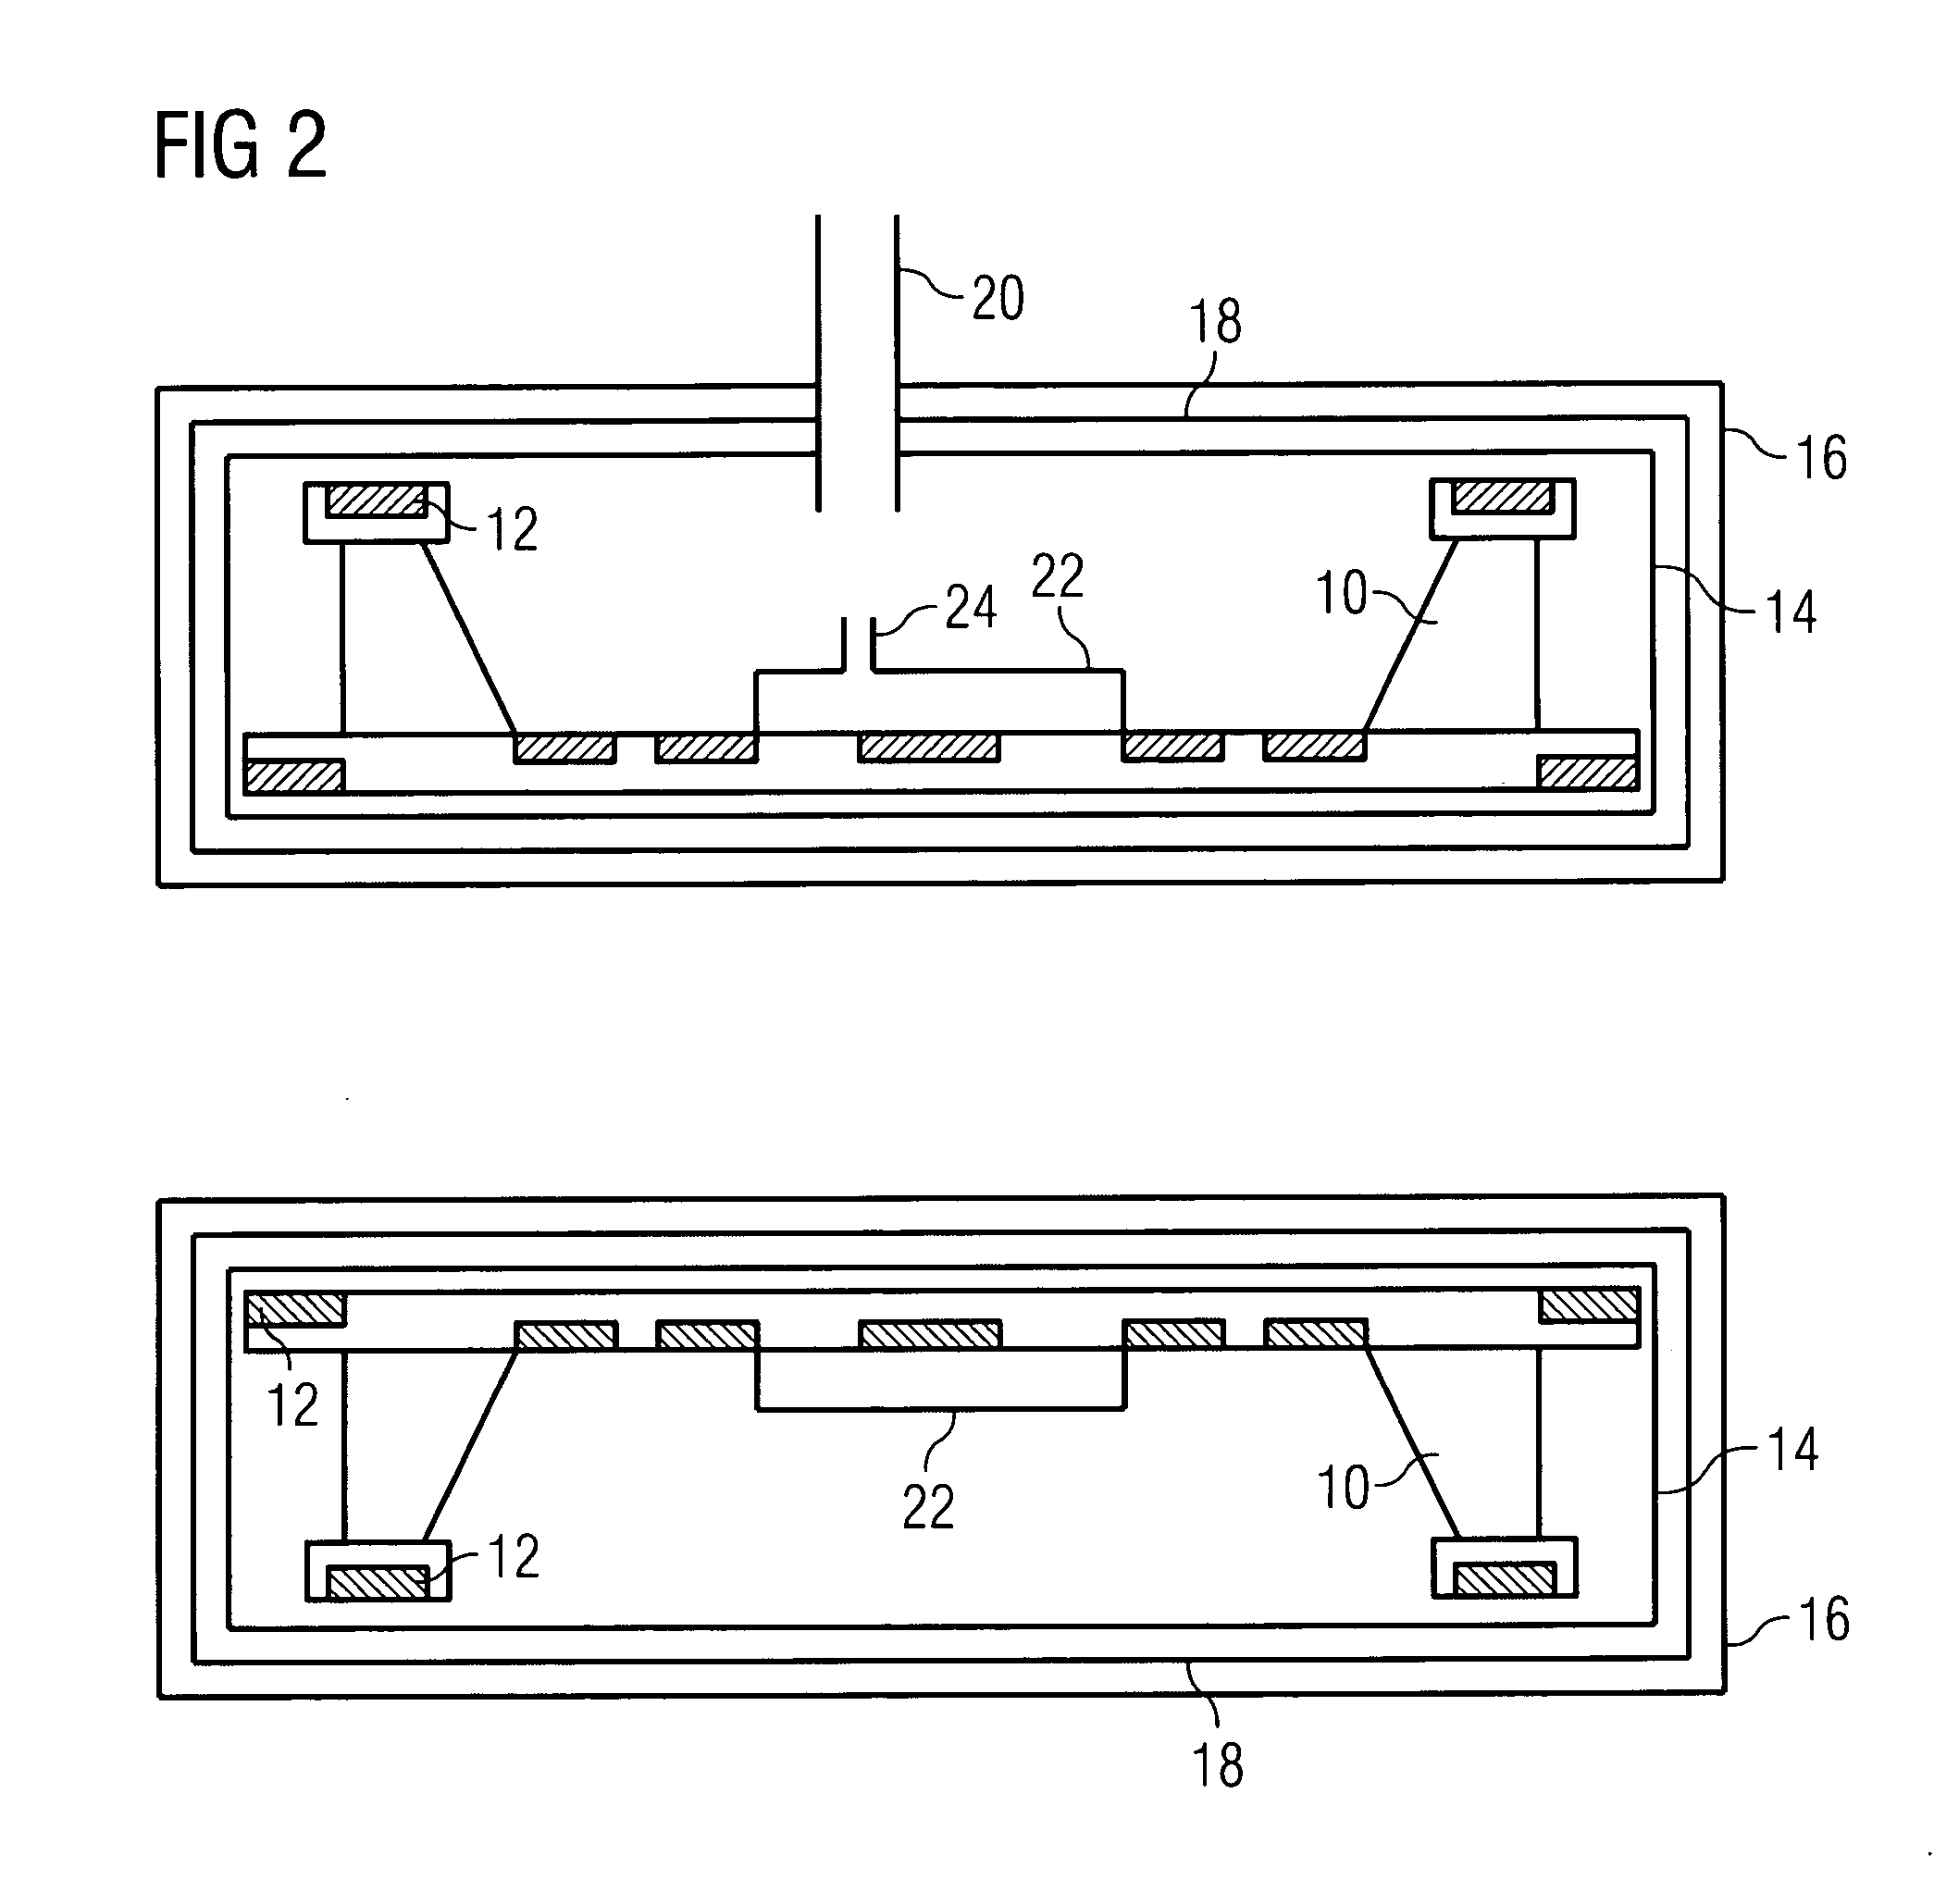 Method and apparatus for maintaining a system at cryogenic temperatures over an extended period without active refrigeration